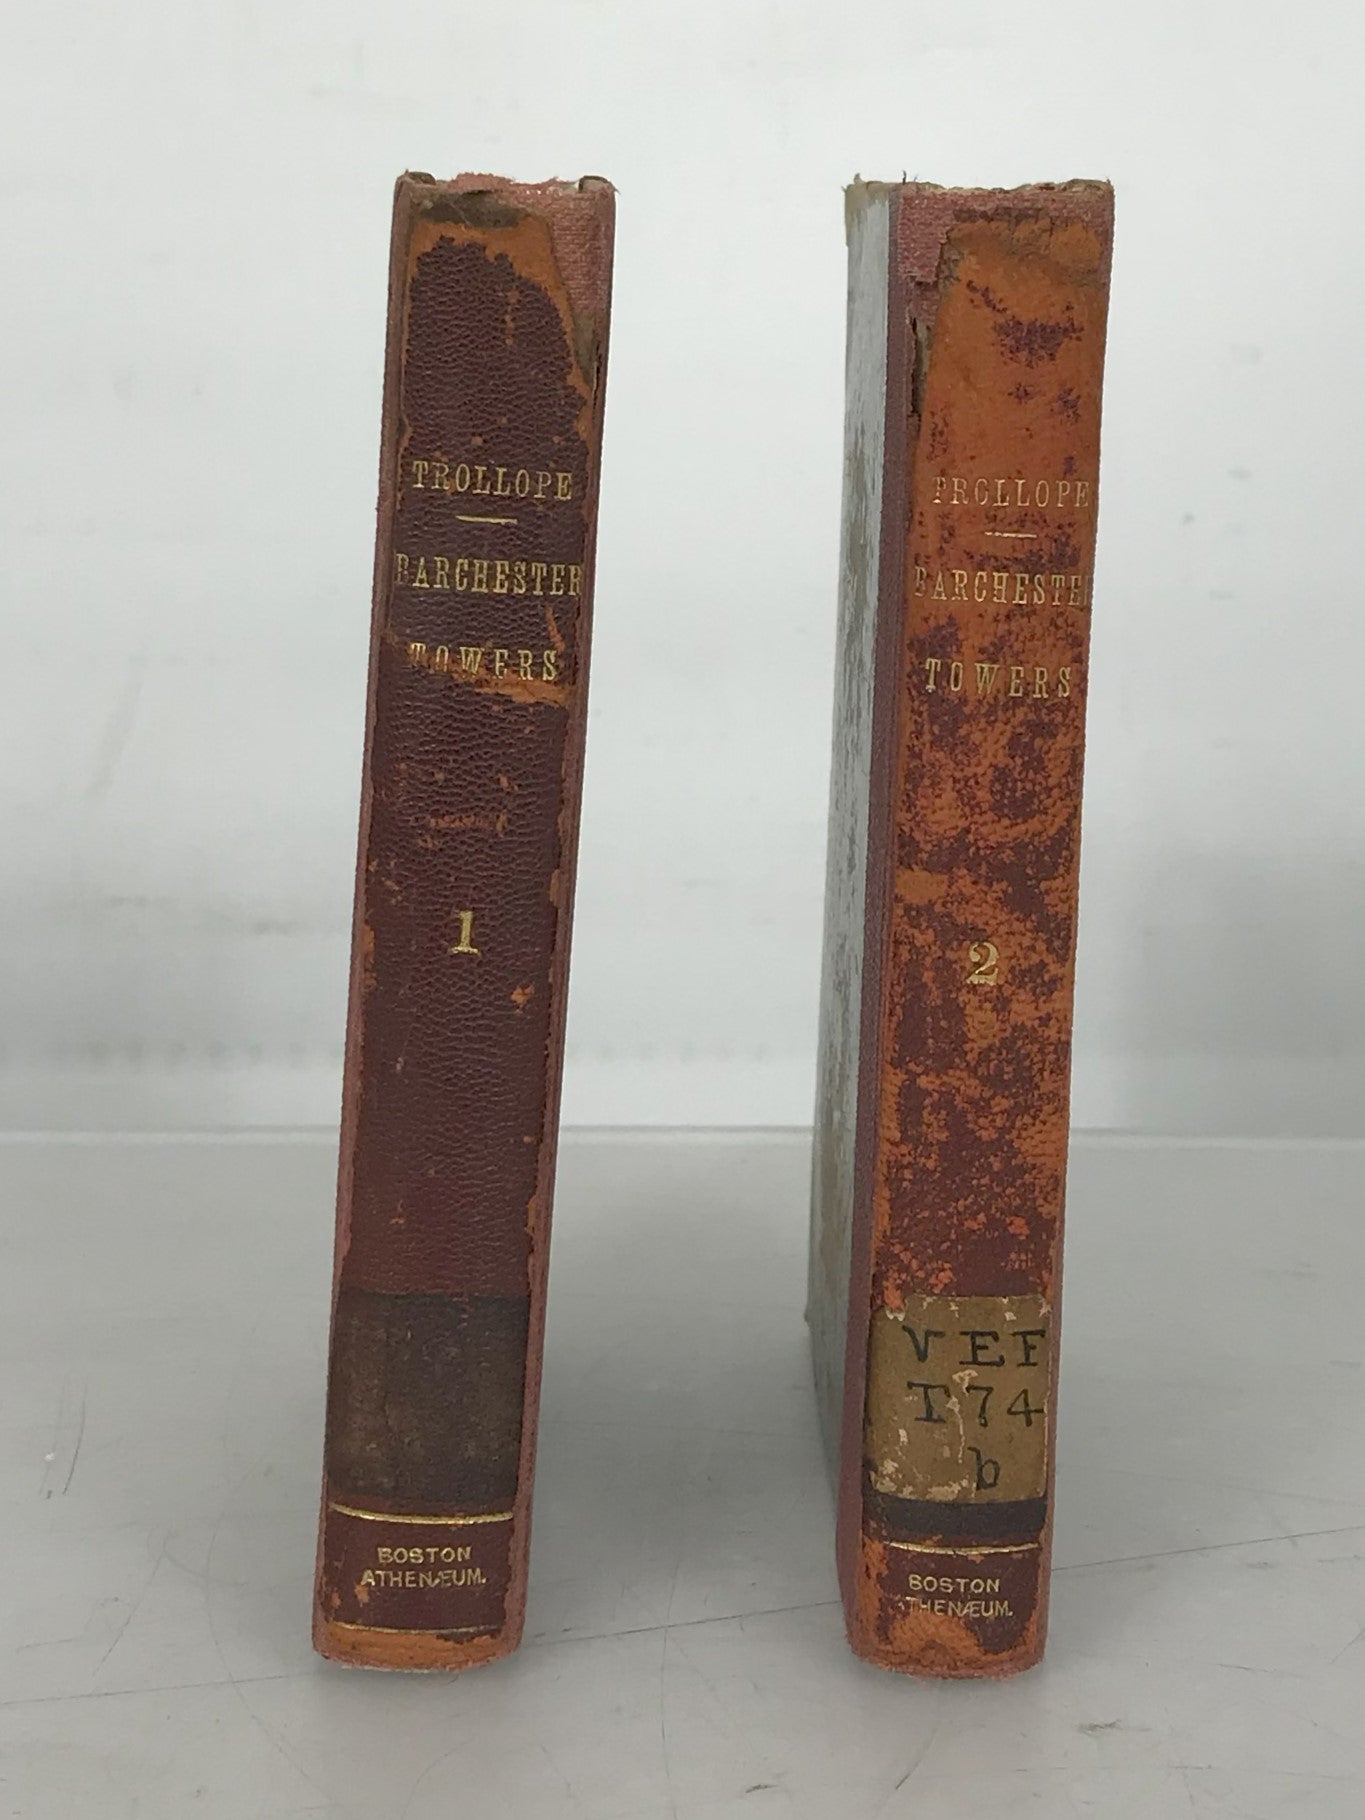 Collection of British Authors Vol 391 and 392 Barchester Towers by Anthony Trollope 1859 ex-libris